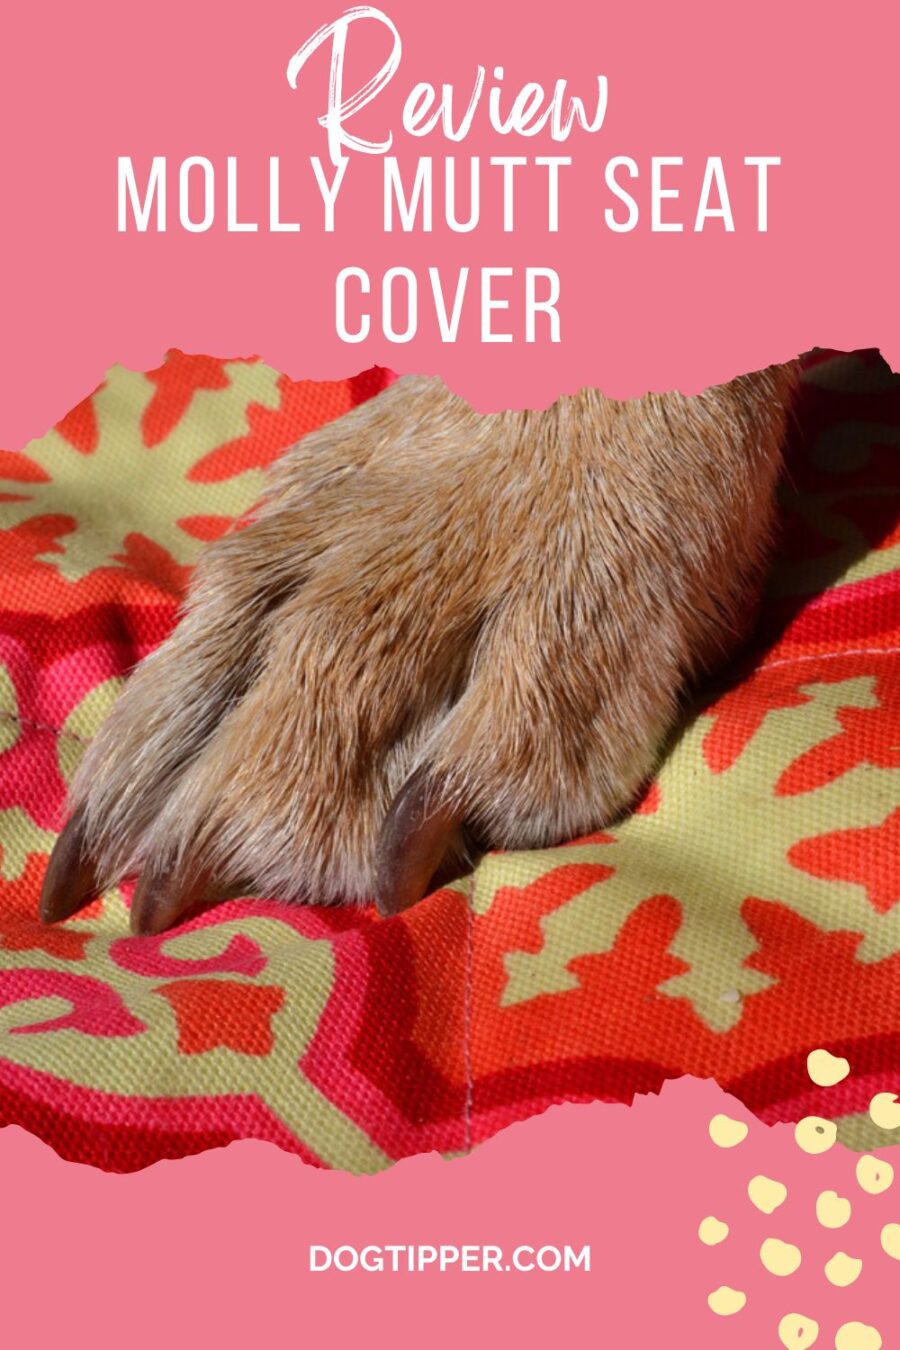 Review: Molly Mutt Seat cover 